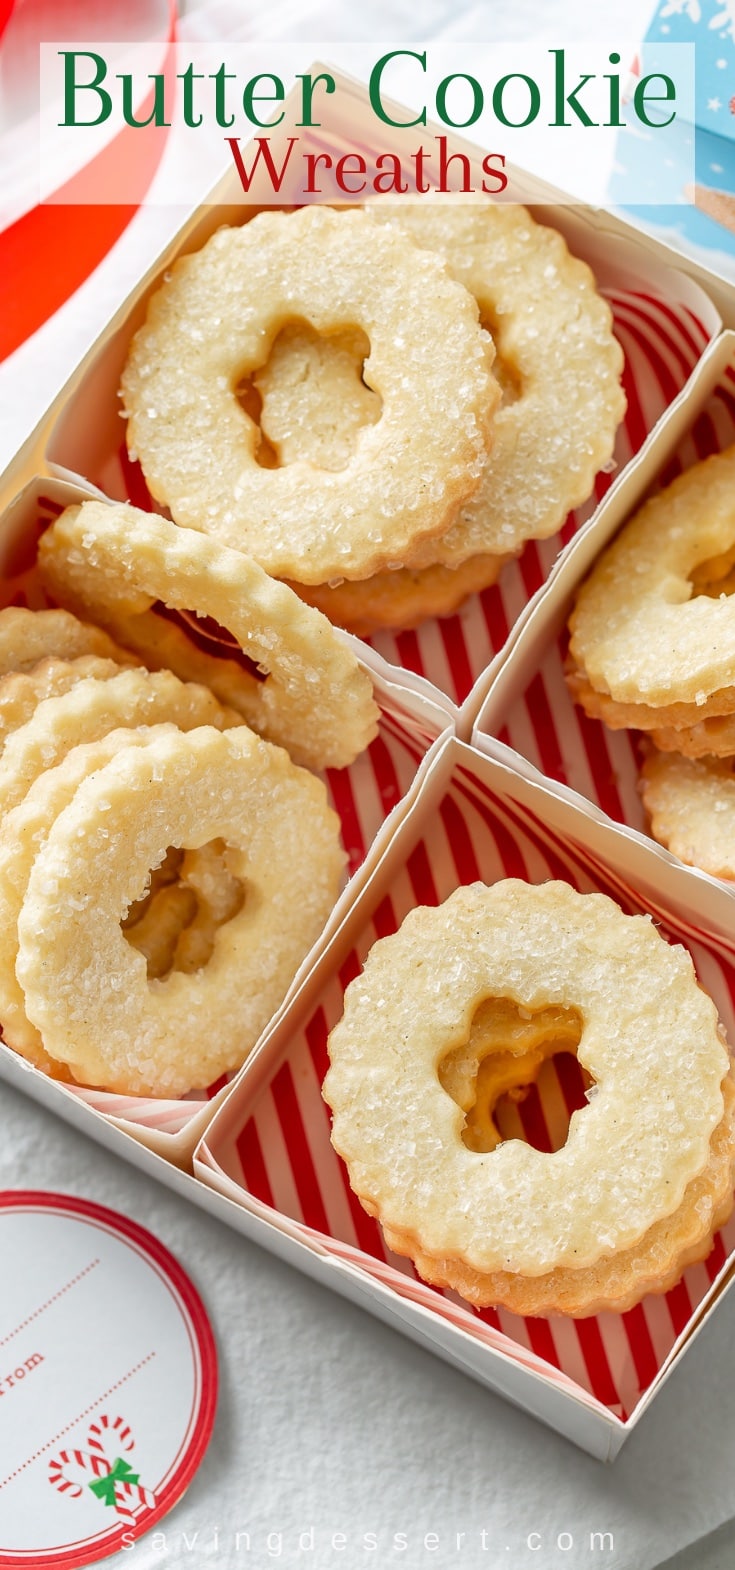 A holiday box filled with butter cookies